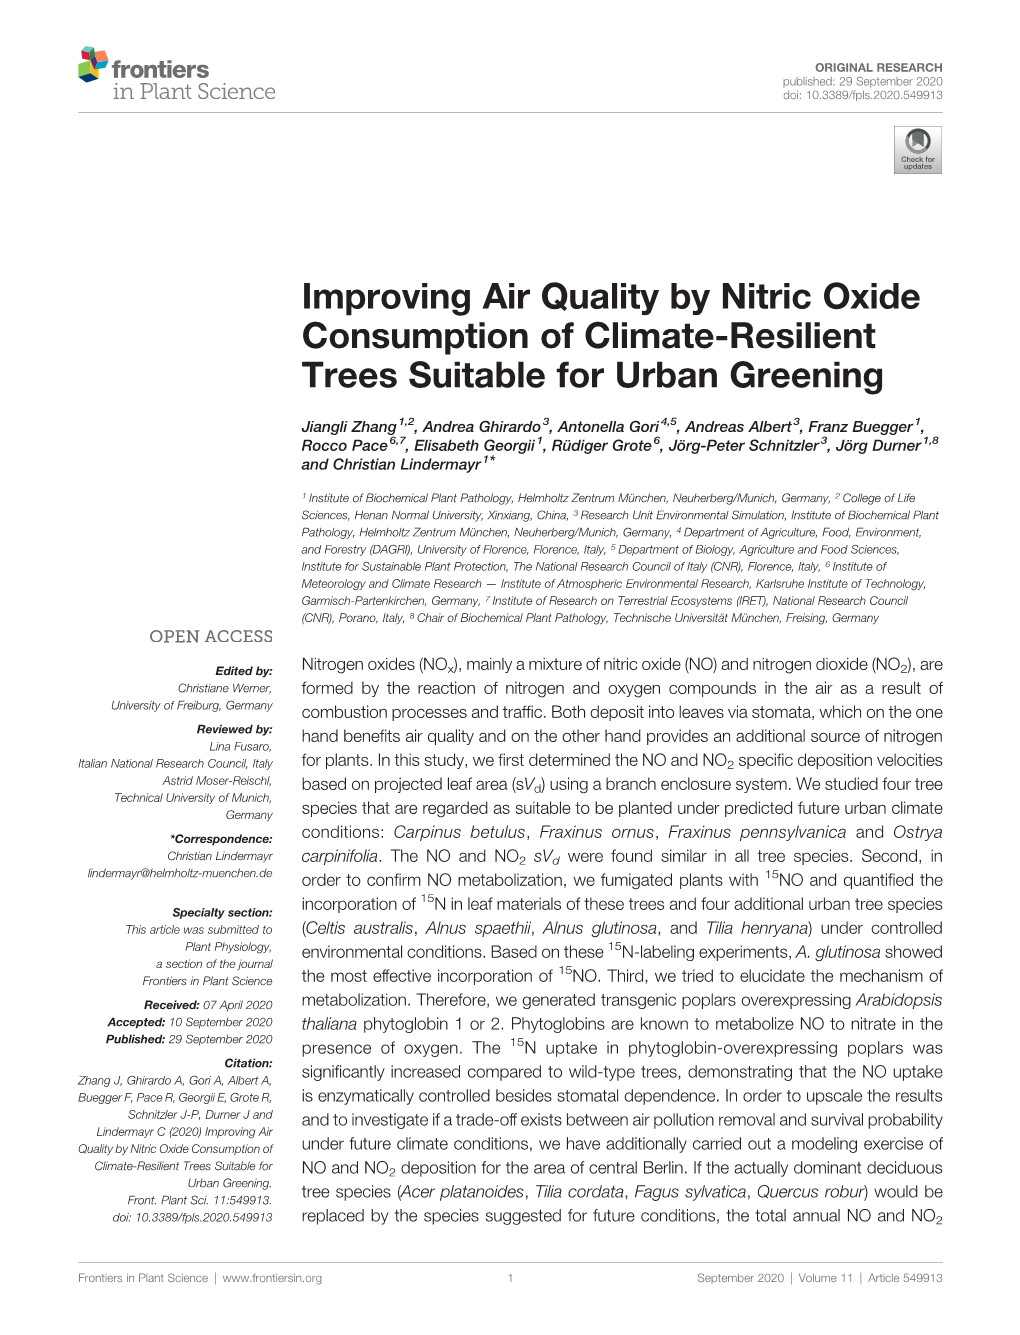 Improving Air Quality by Nitric Oxide Consumption of Climate-Resilient Trees Suitable for Urban Greening